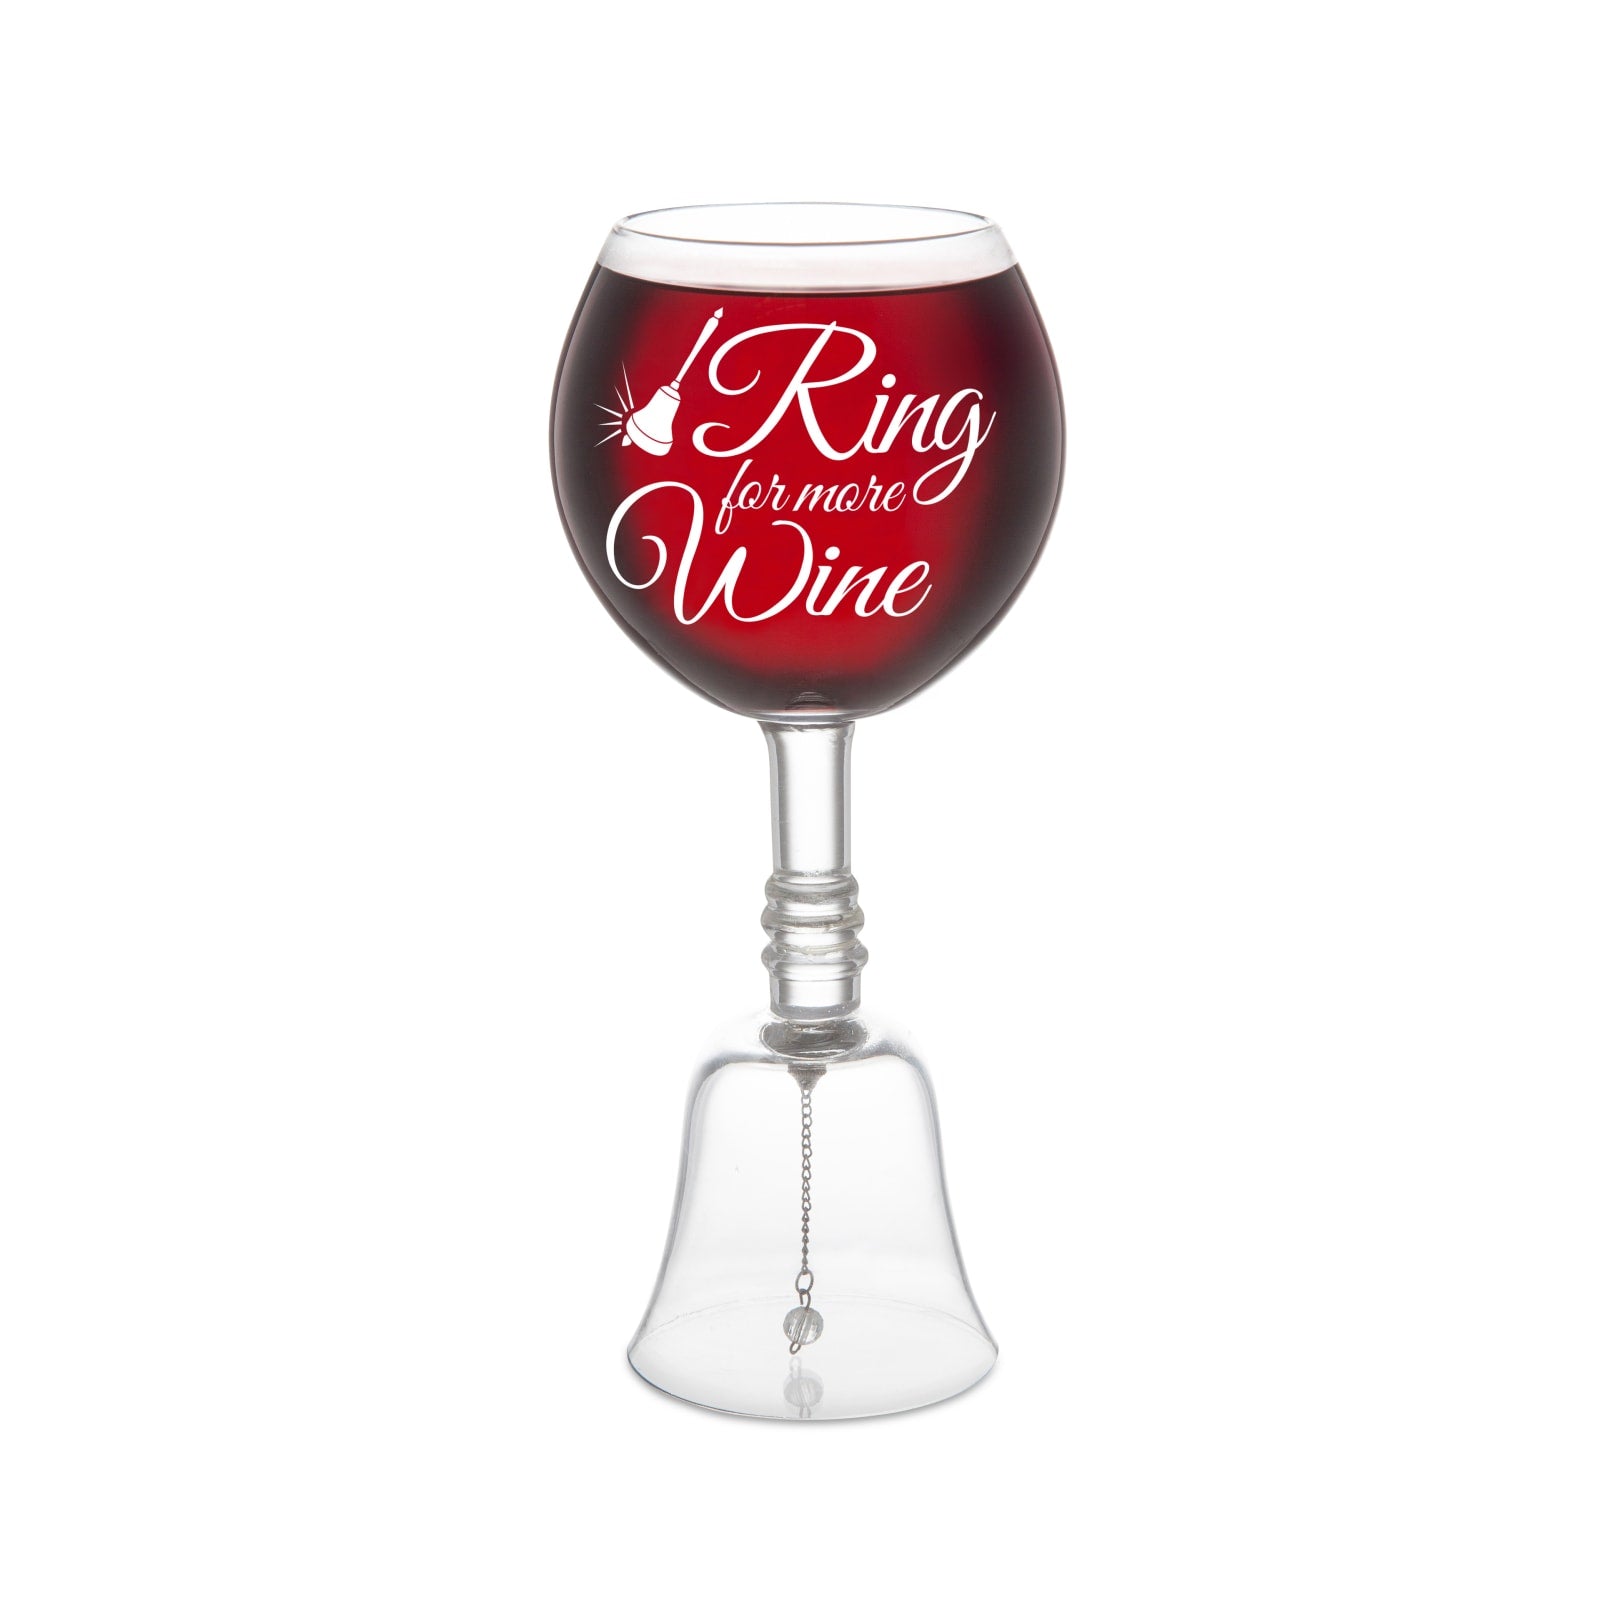 The Ring for More Wine Wine Glass